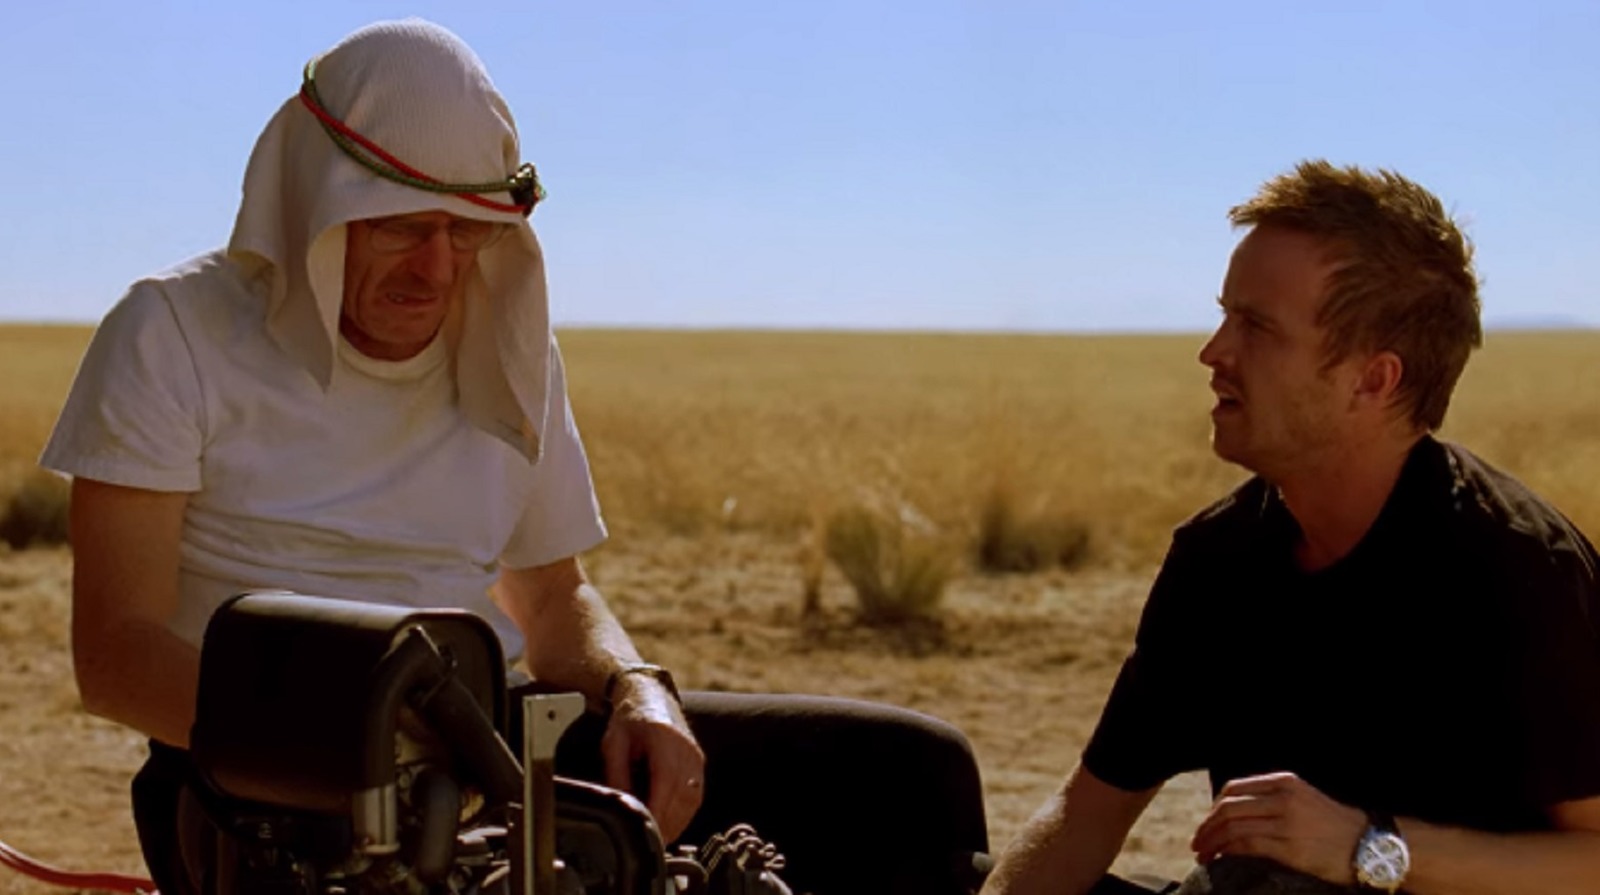 The Funniest Episode Of Breaking Bad Probably Isn't What You'd Think